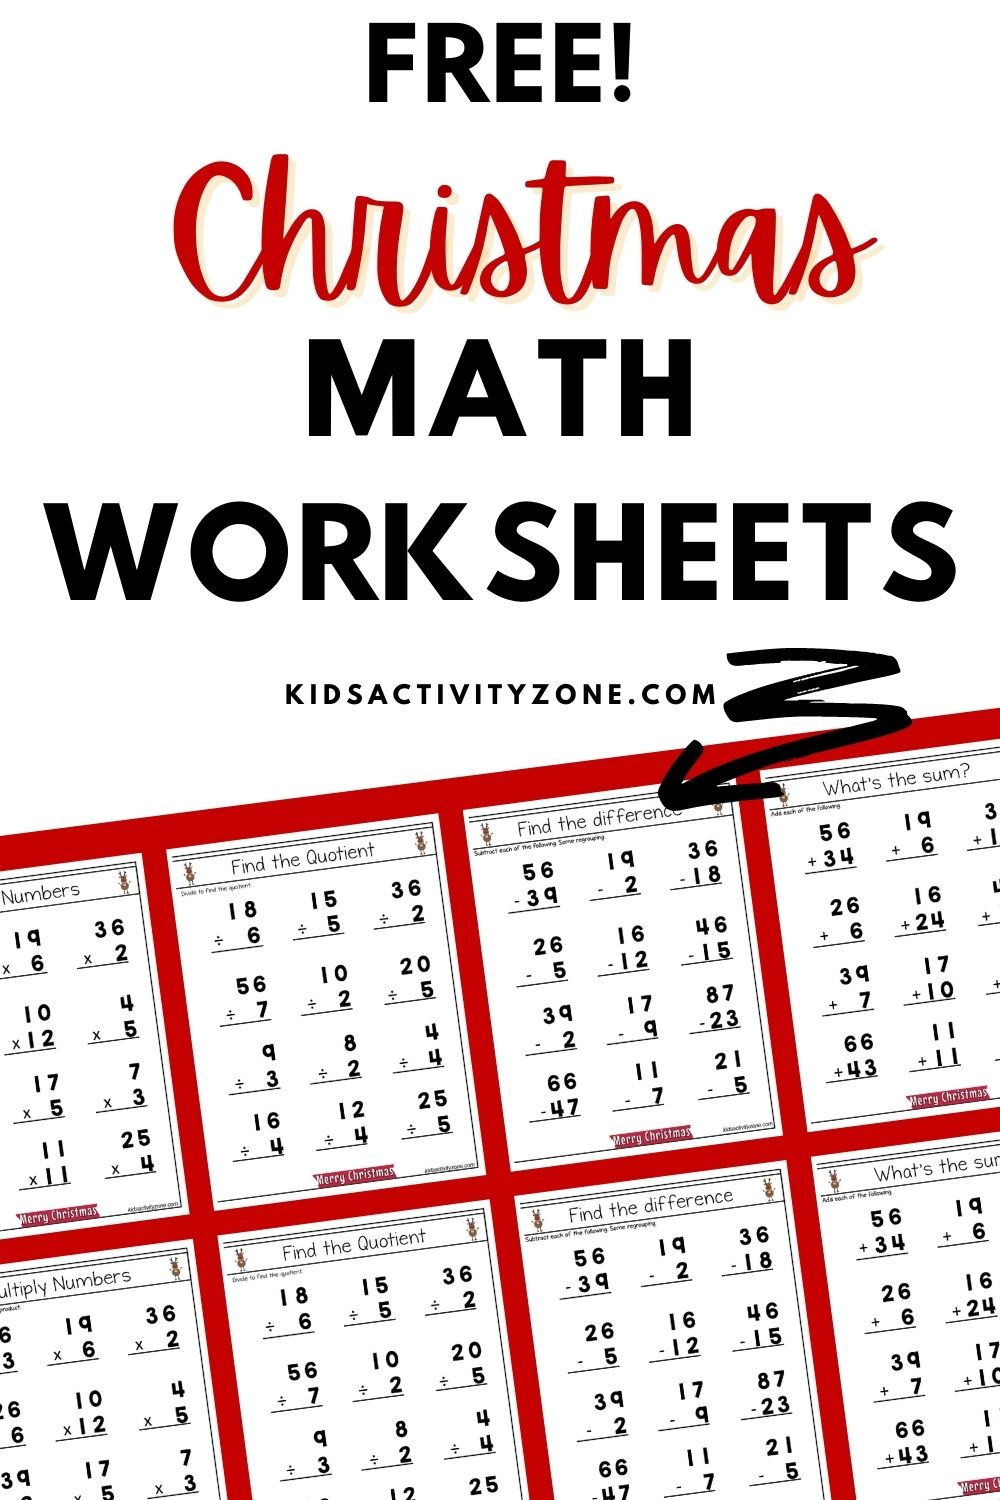 Christmas Math Worksheets that are geared for second, third and fourth graders! The set has five different pages including addition, subtraction, division and multiplication. It's great for homeschoolers, homework, holiday break or if you child needs extra math practice in elementary!